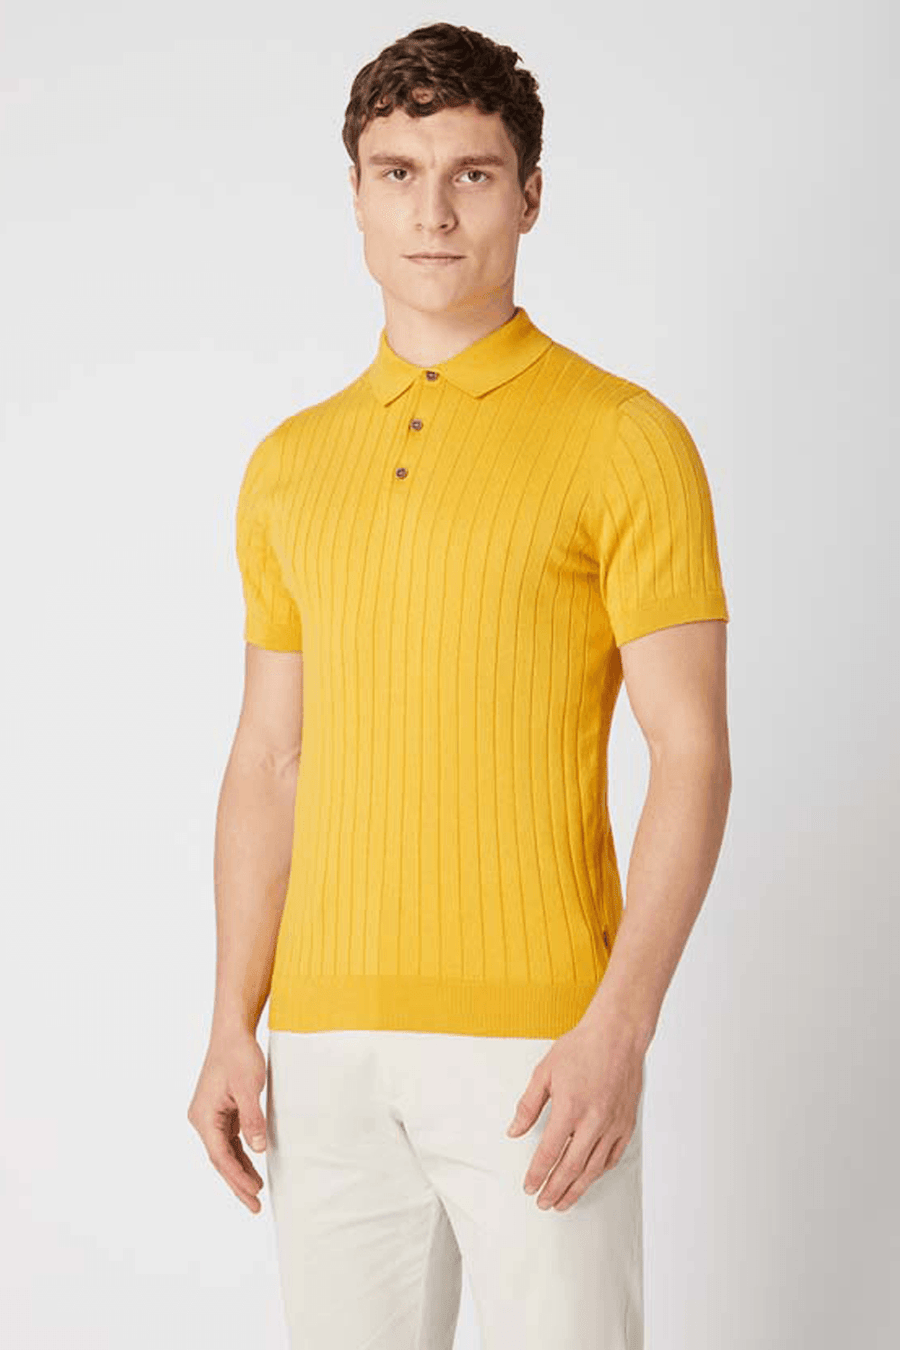 Buy the Remus Uomo Slim Fit Cotton S/S T-Shirt in Yellow at Intro. Spend £50 for free UK delivery. Official stockists. We ship worldwide.